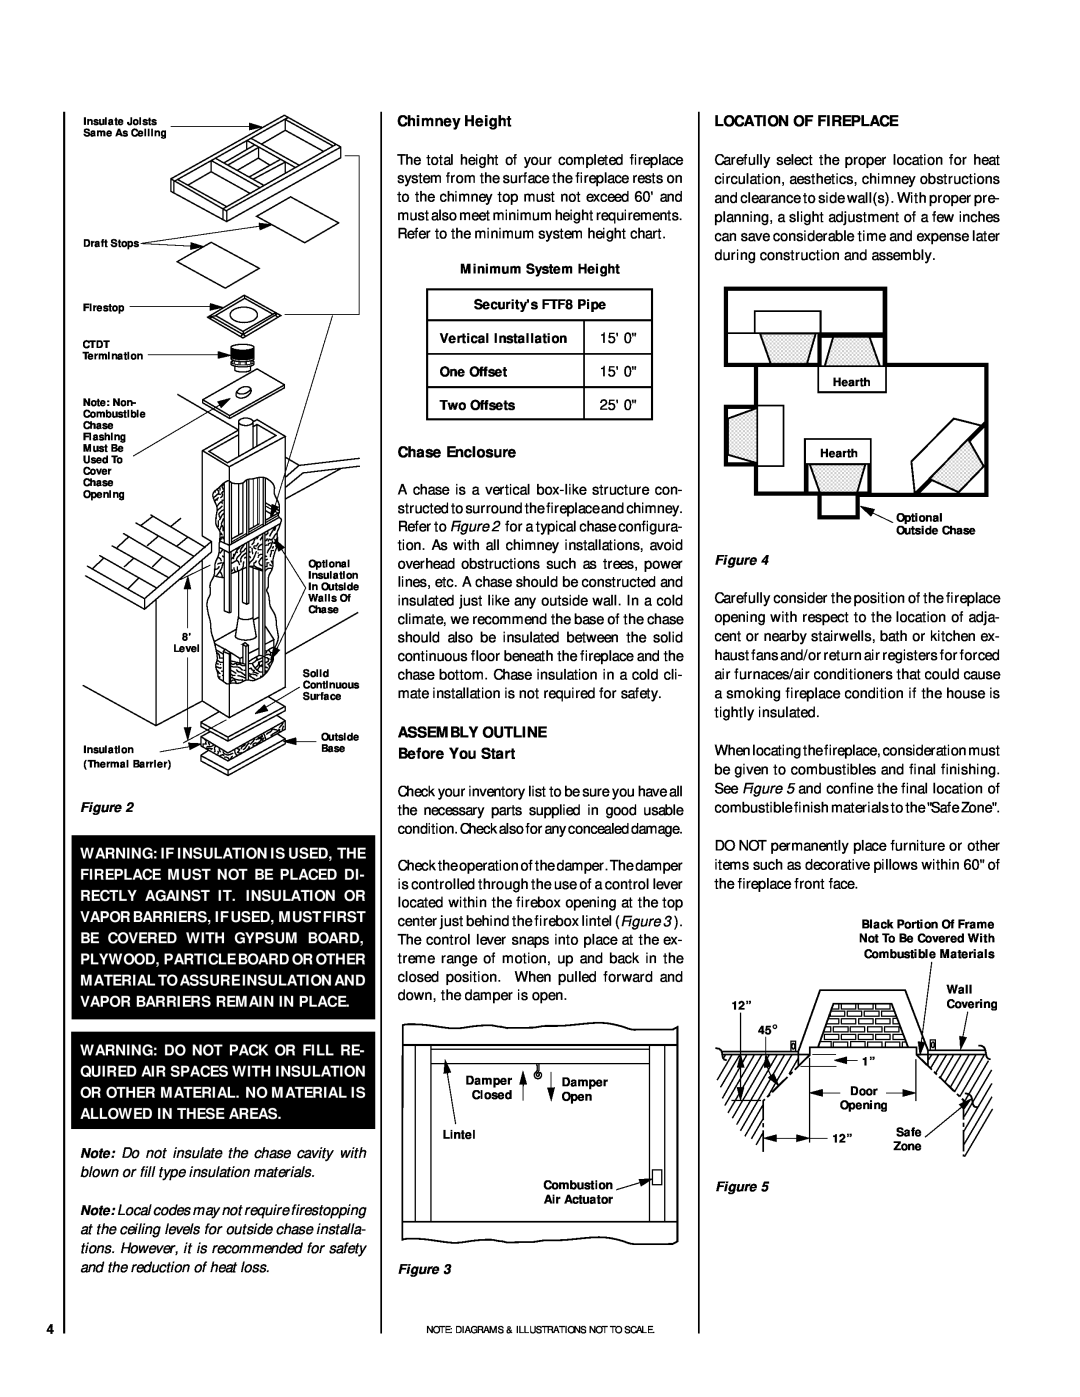 Linksys RDI-36-H HCI-36-H Chimney Height, Chase Enclosure, ASSEMBLY OUTLINE Before You Start, Location Of Fireplace 